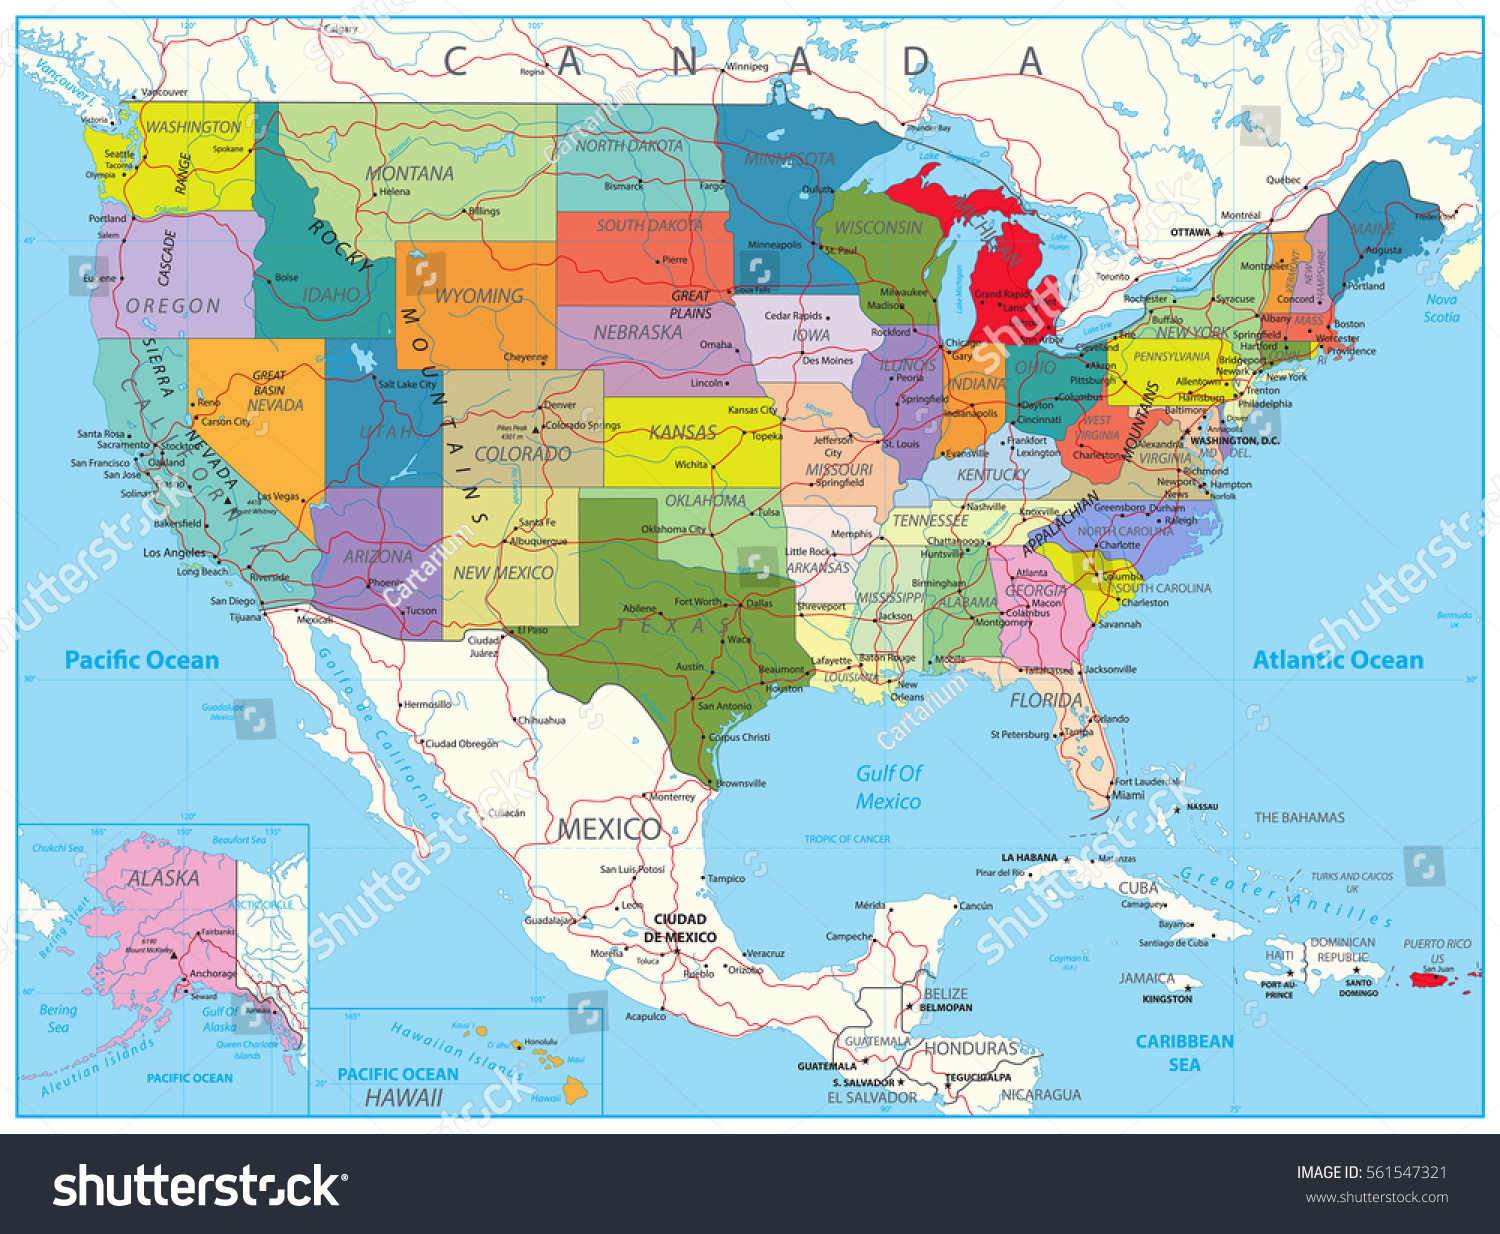 Usa Political Road Map Roads Water Stock Vector Royalty Free